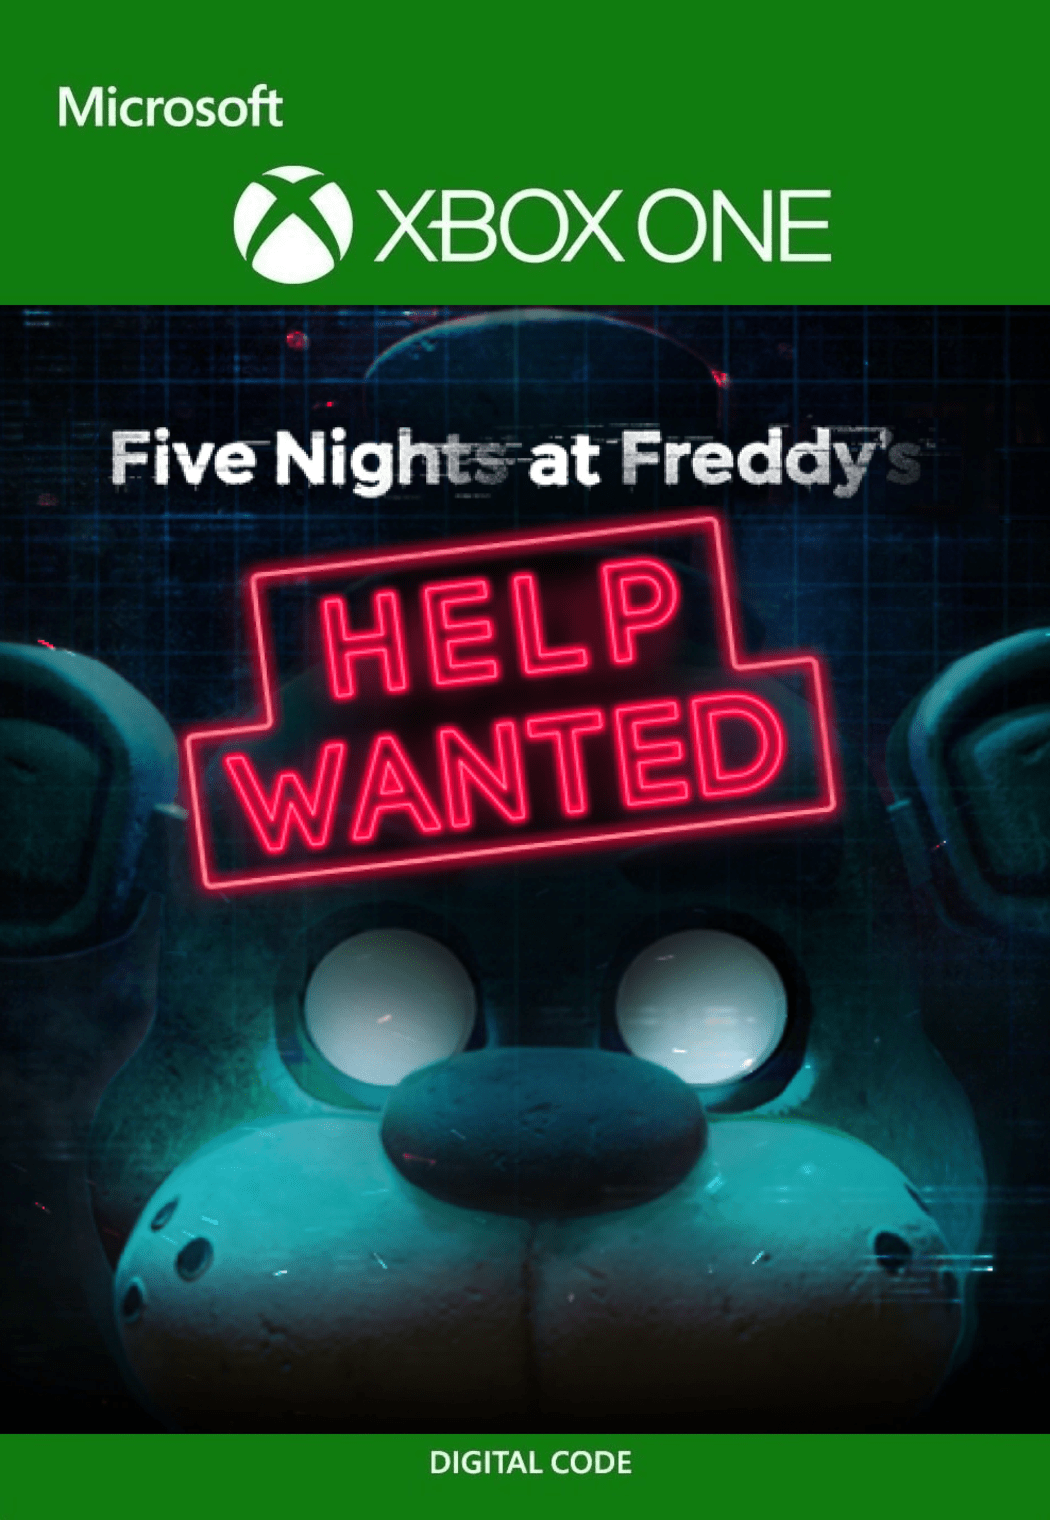 Buy Five Nights at Freddy's 2 Xbox key! Cheap price